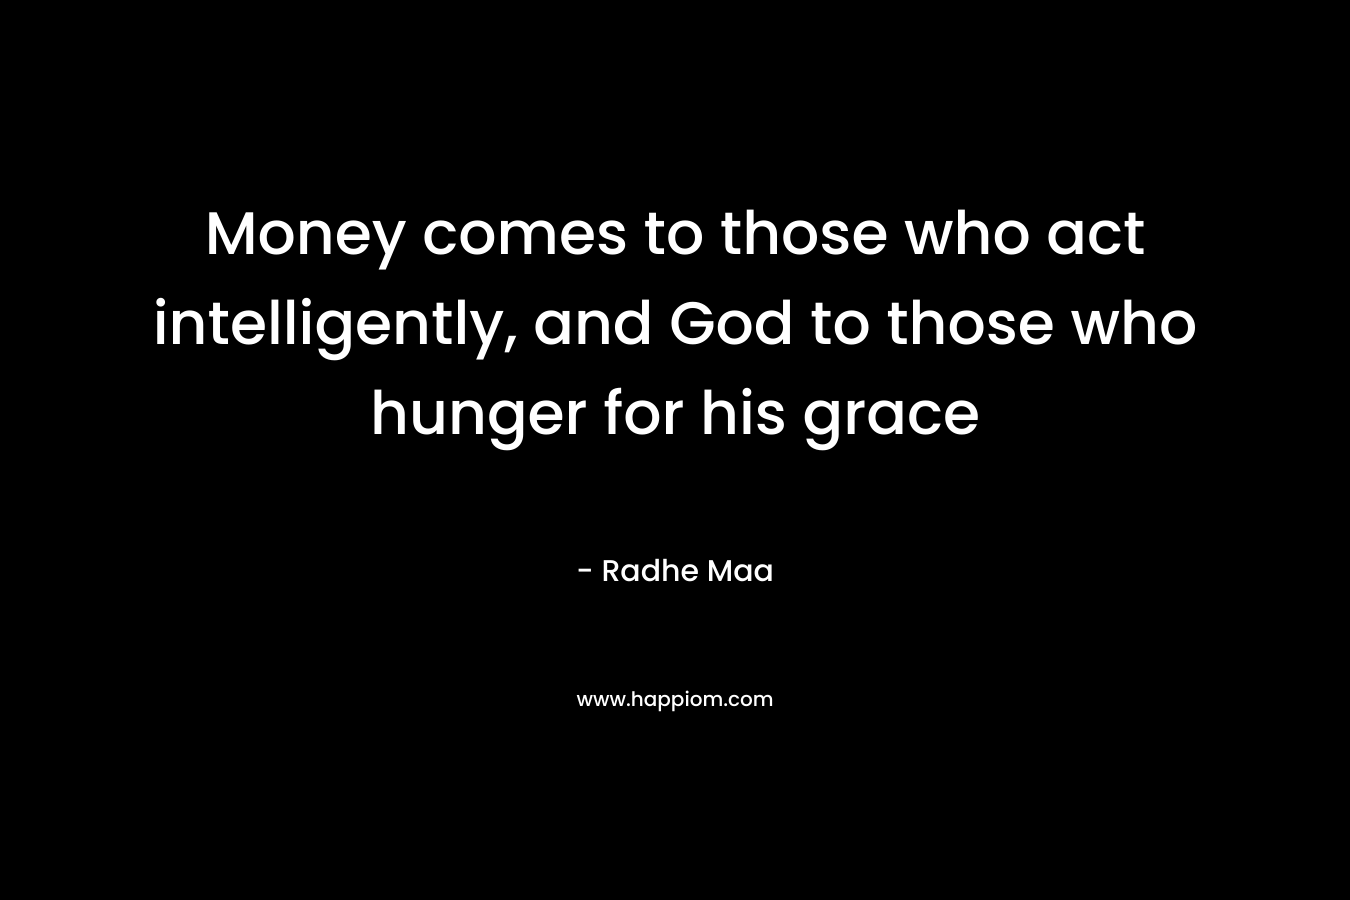 Money comes to those who act intelligently, and God to those who hunger for his grace